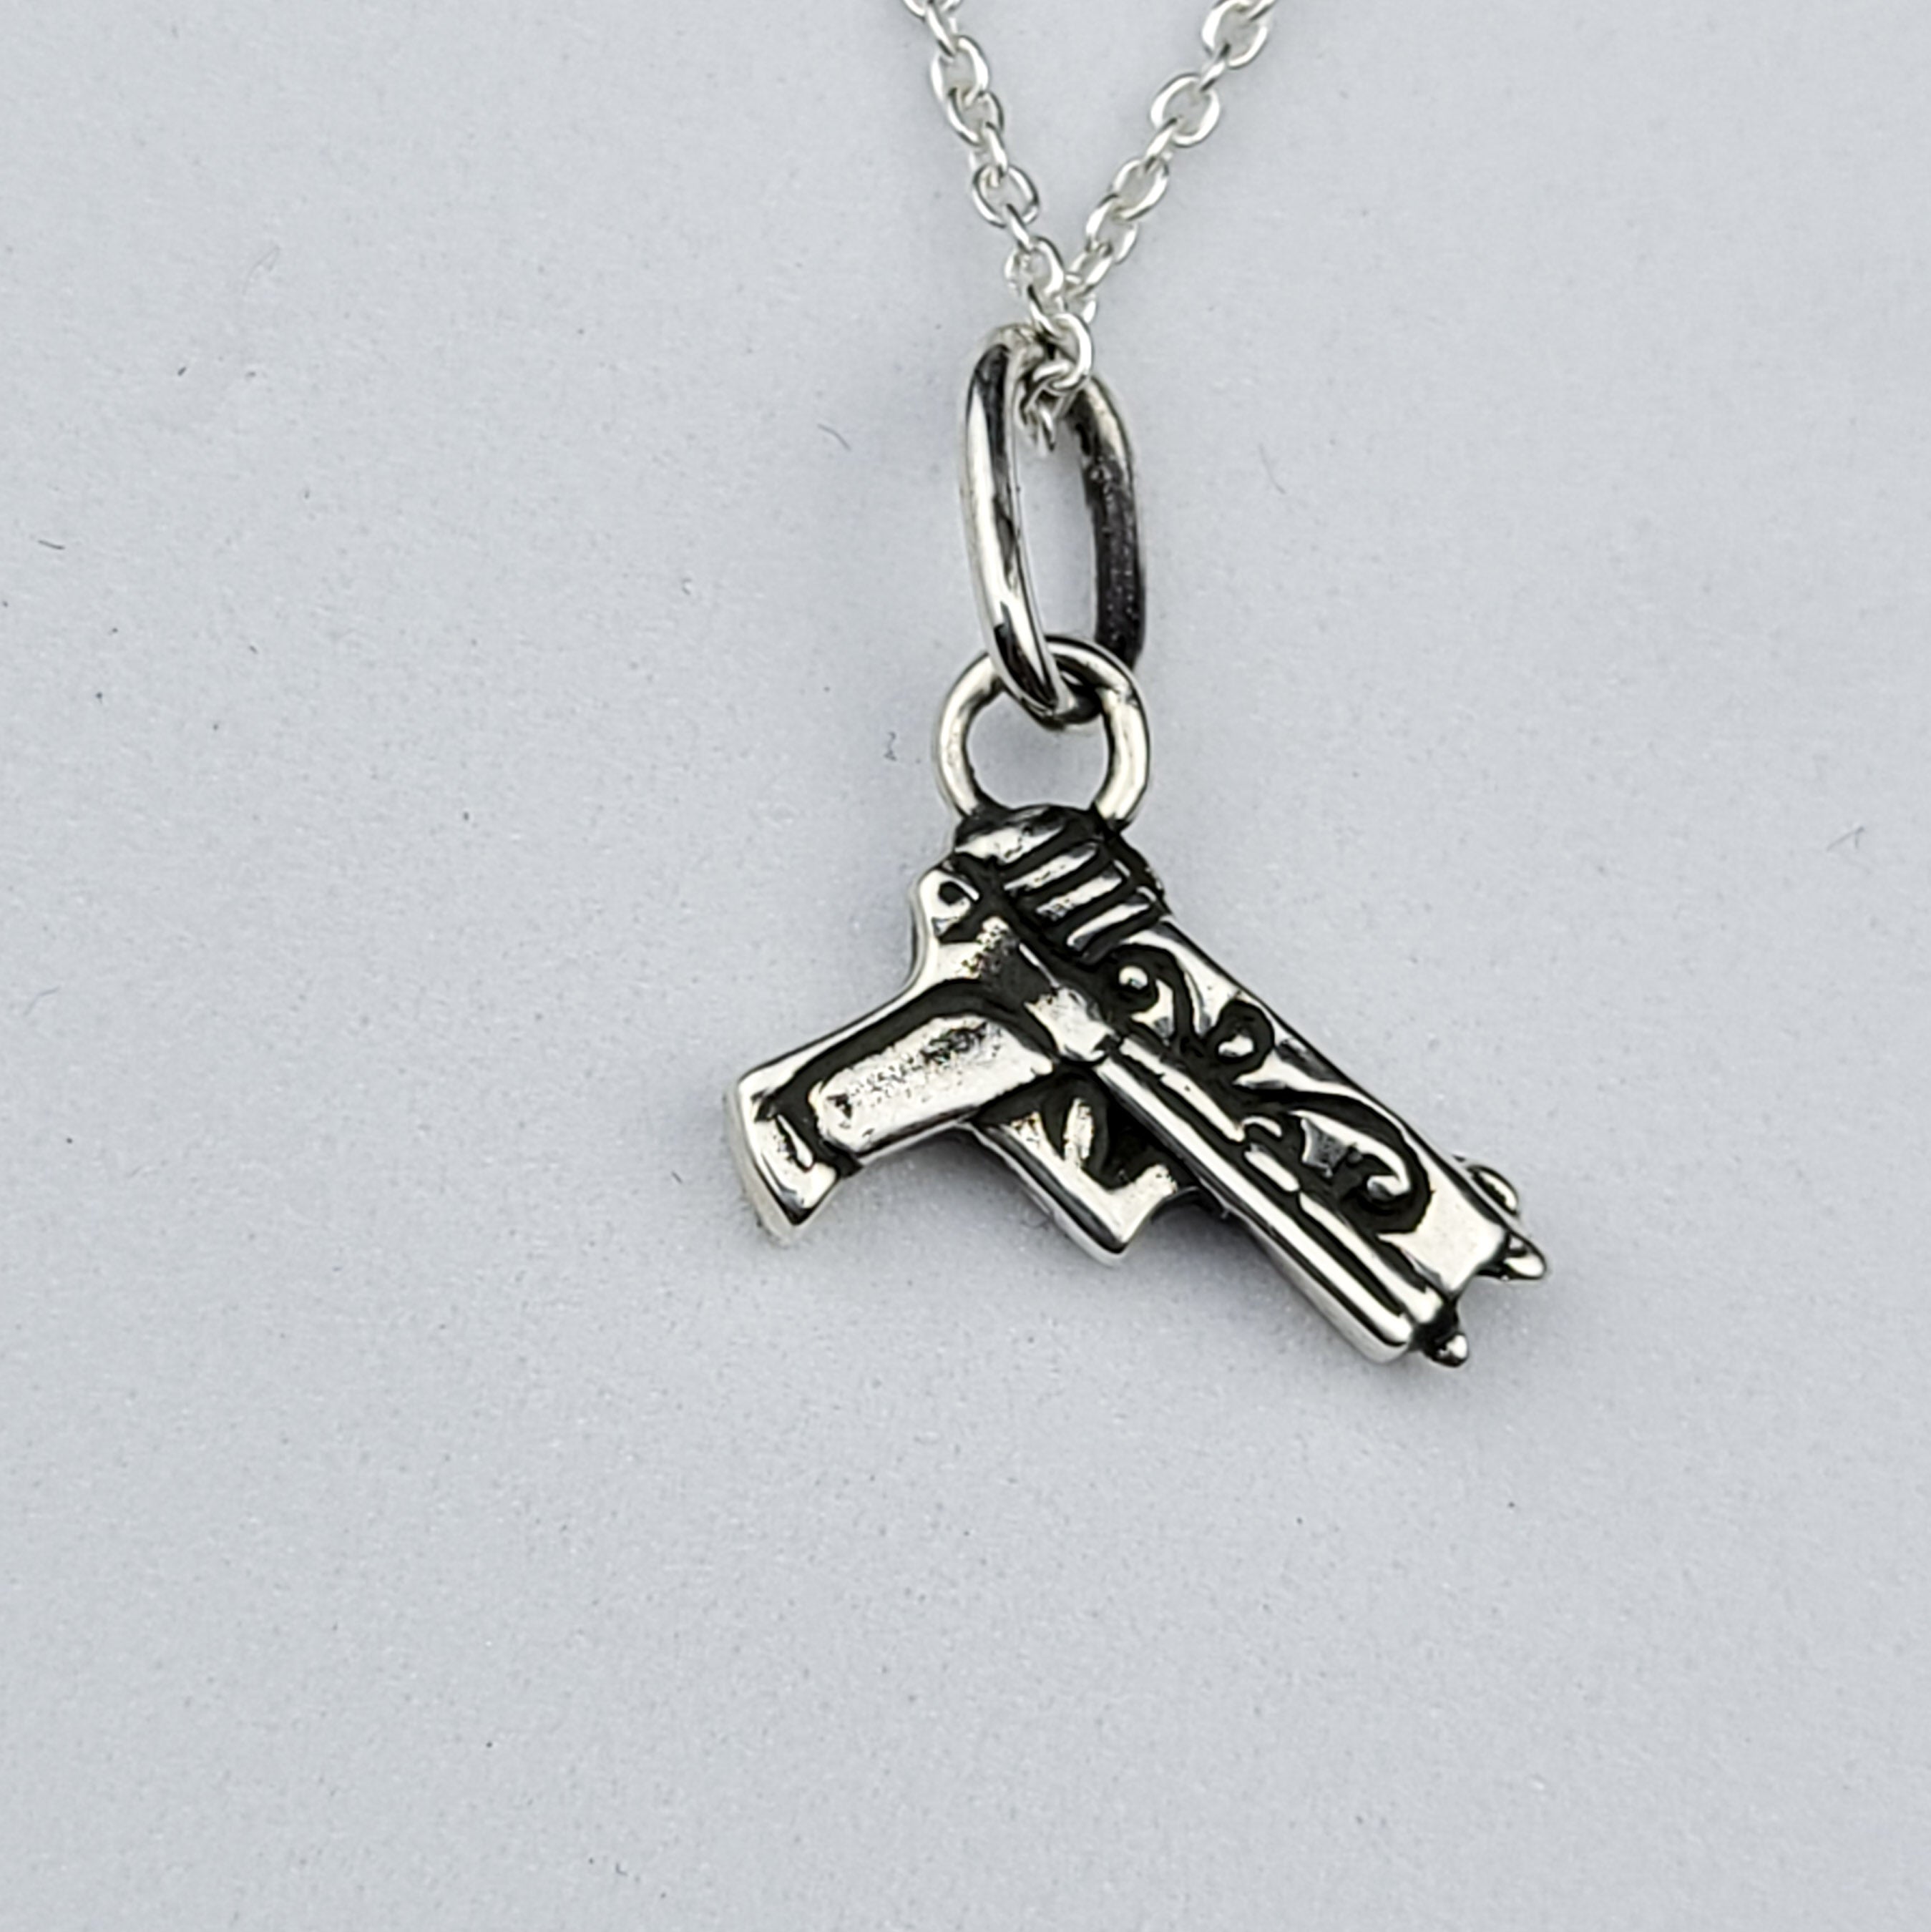 Tiny Silver Gun with Roses Pendant